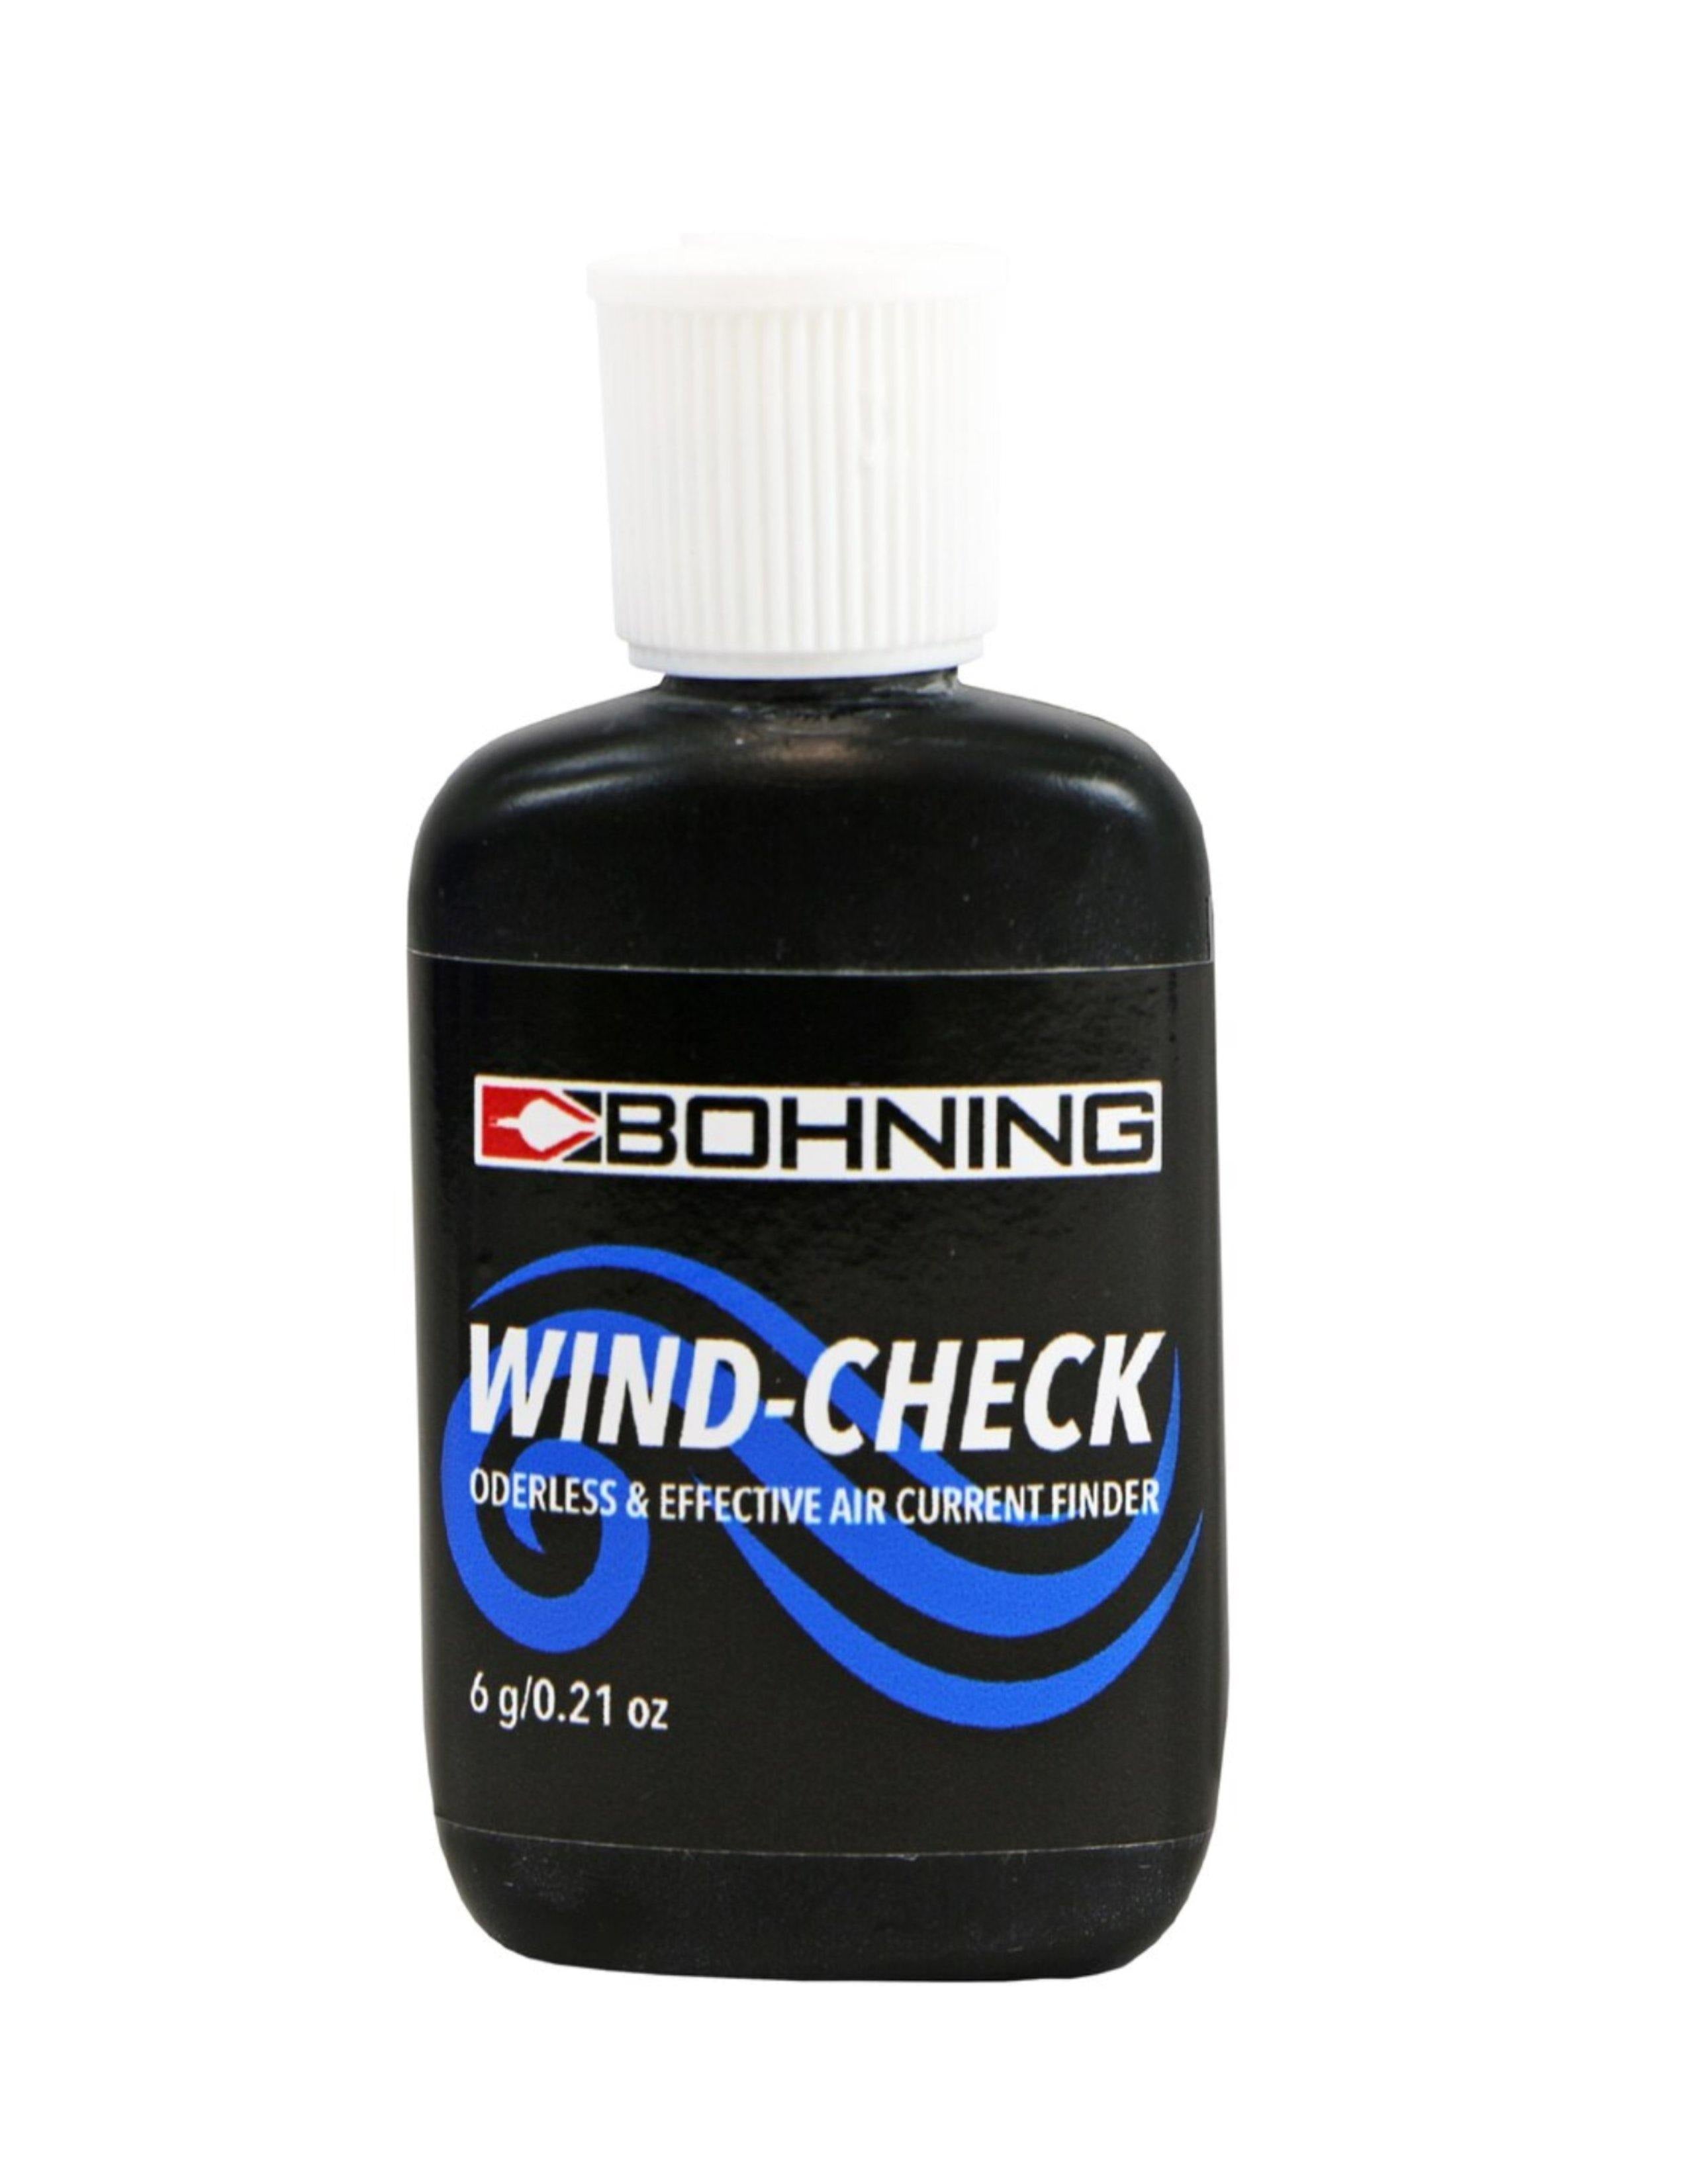 Bohning Archery Wind Check Powder - Leapfrog Outdoor Sports and Apparel